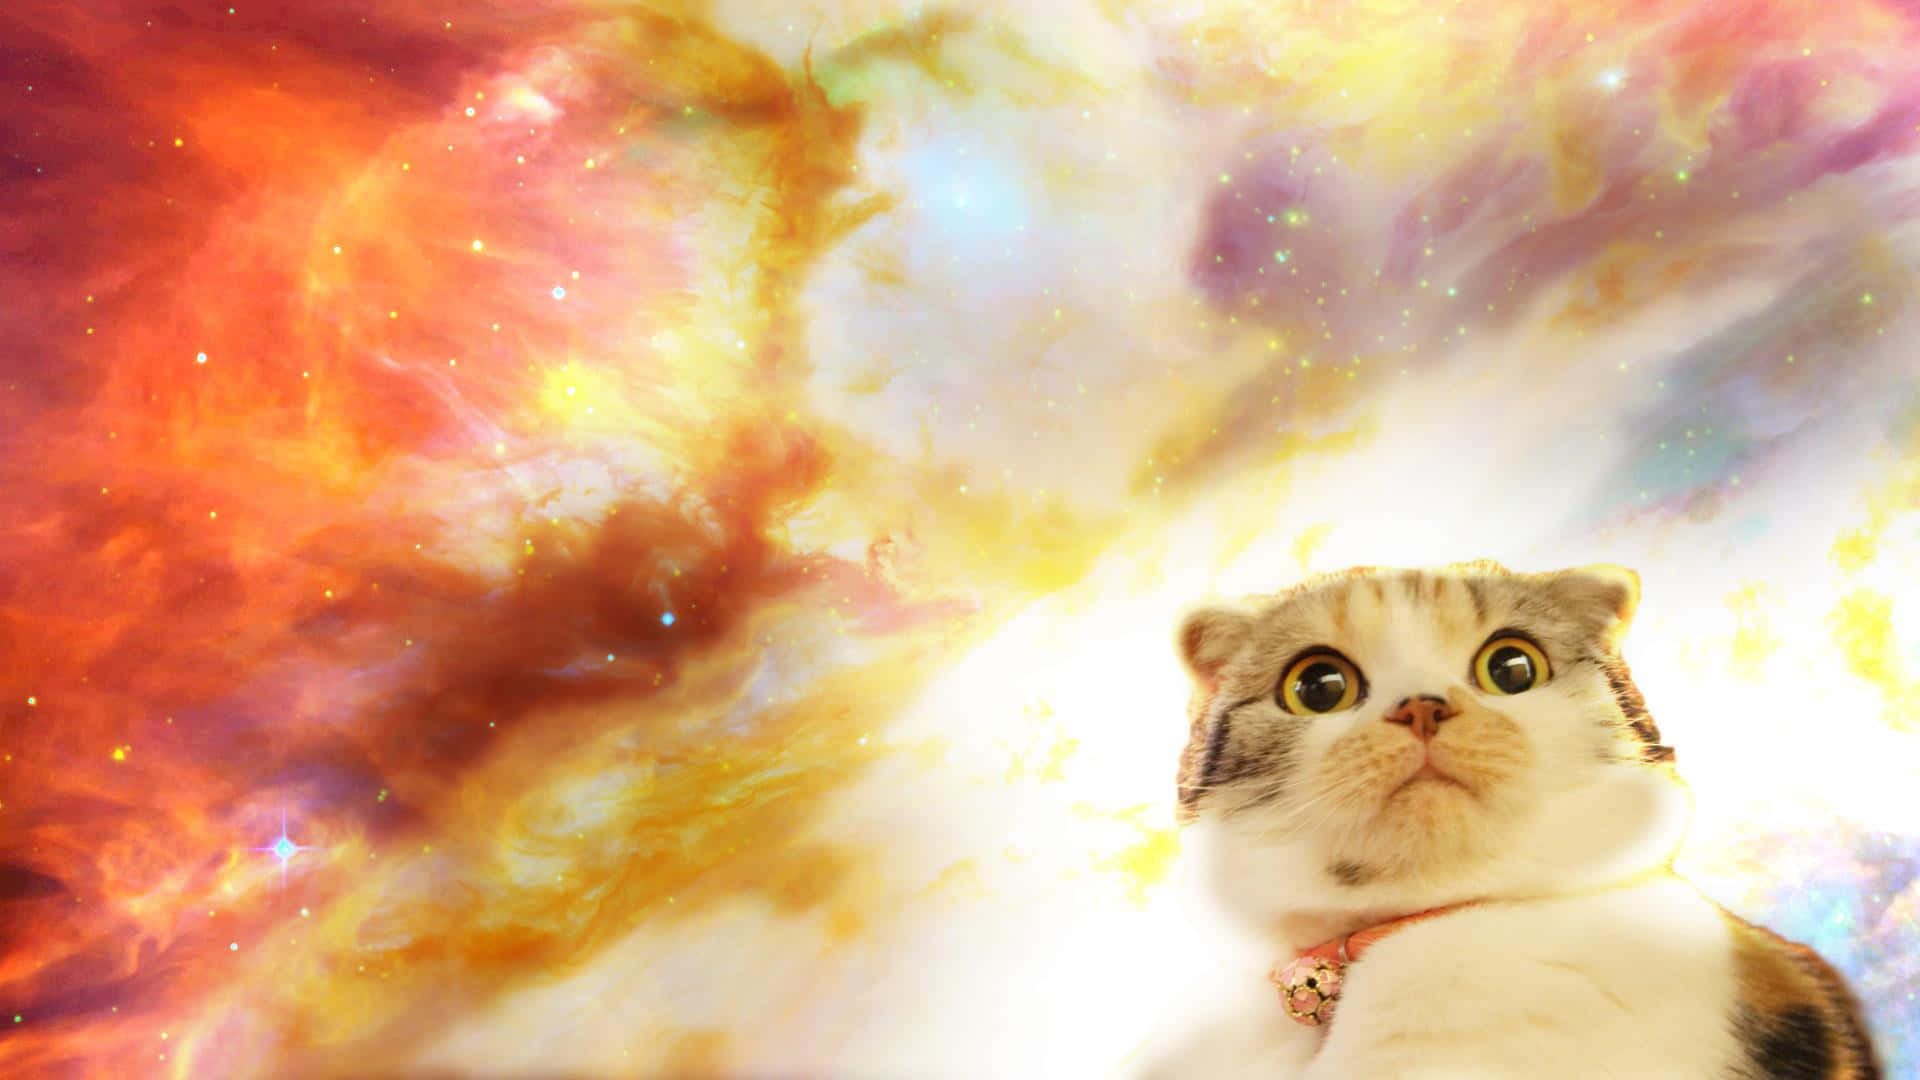 That's one purrfectly awesome space cat! Wallpaper